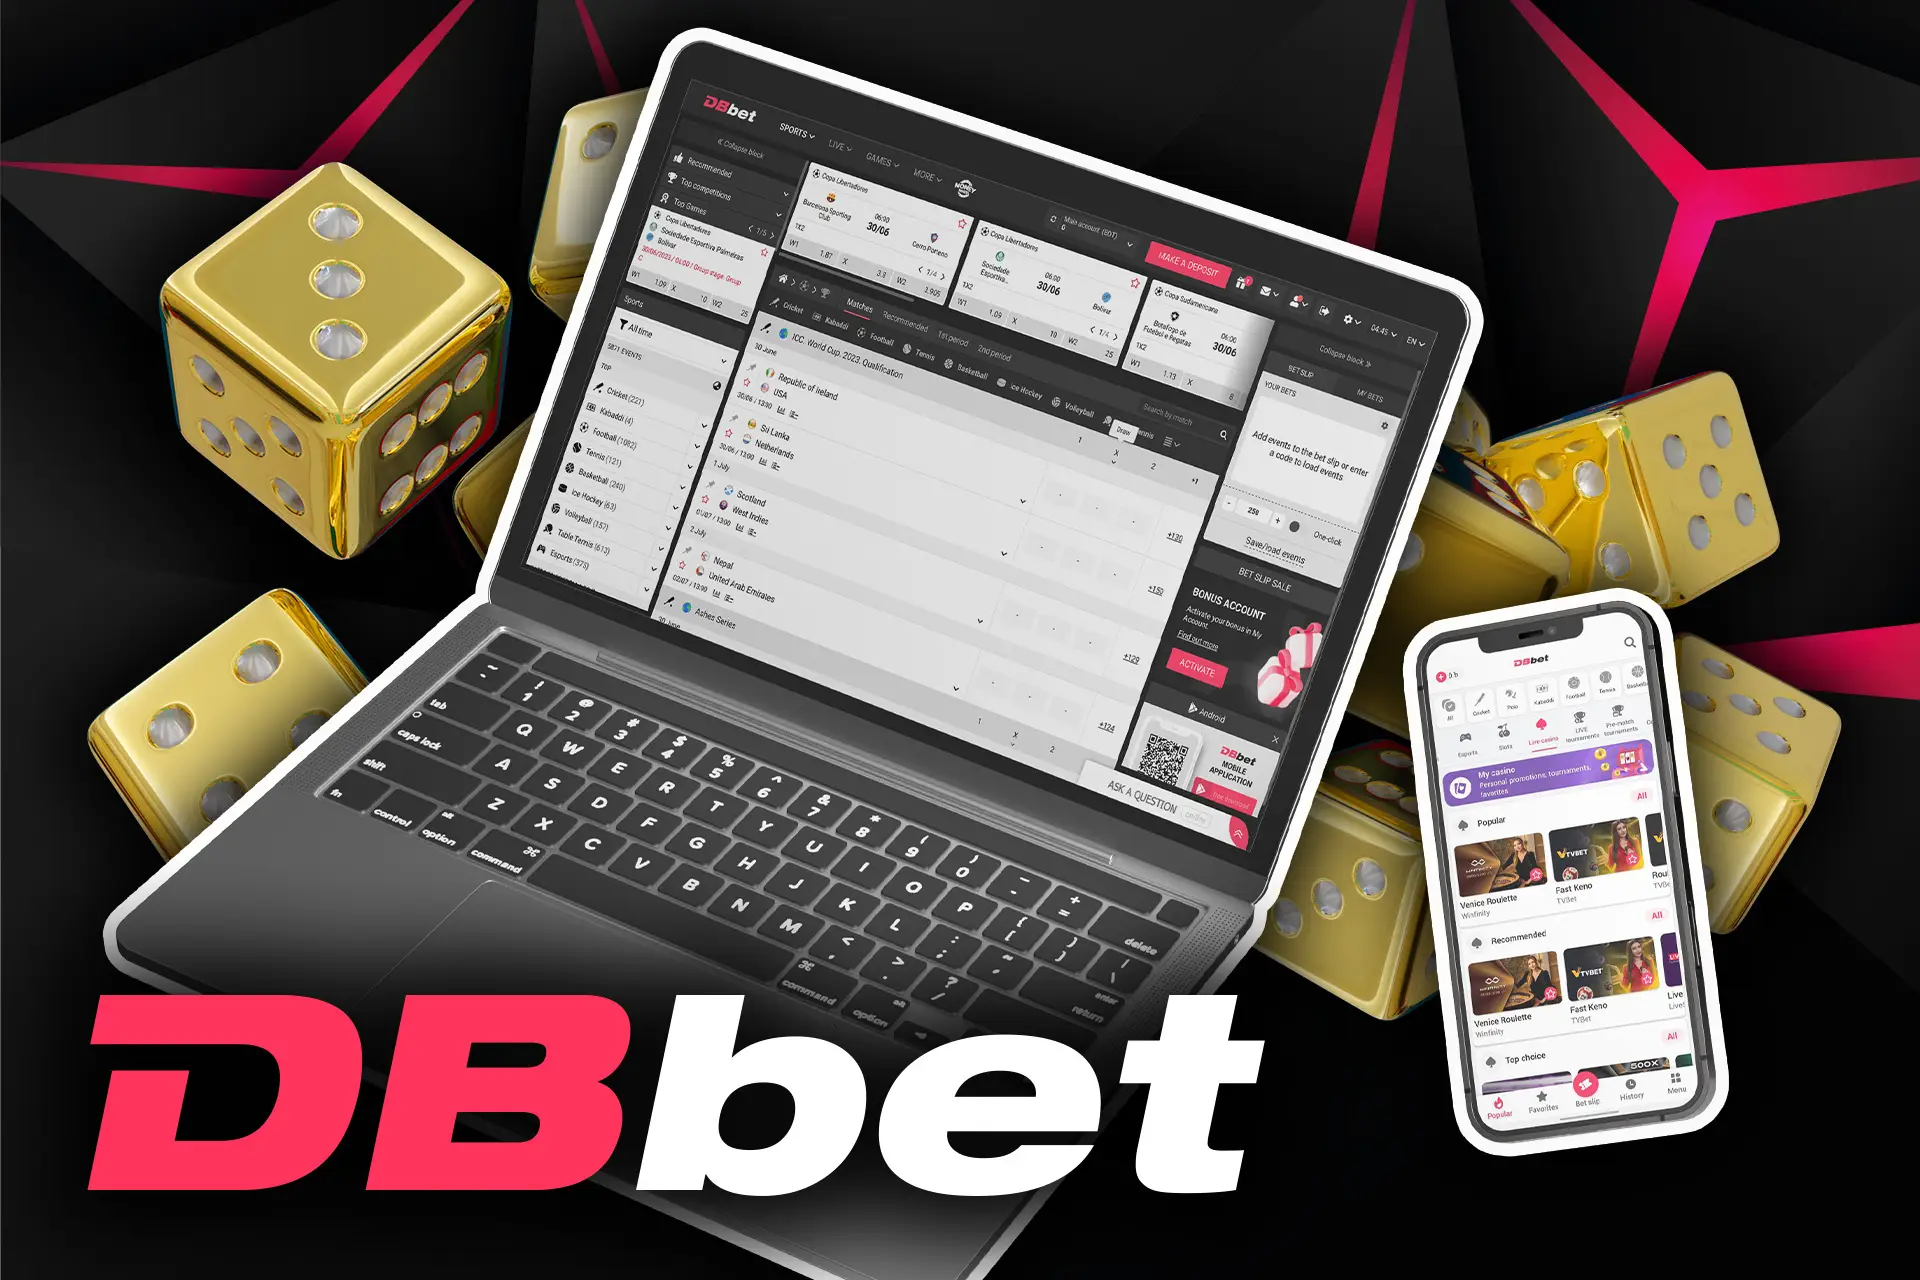 With DBbet, you have plenty of games to choose from, as well as a variety of options for sports betting.